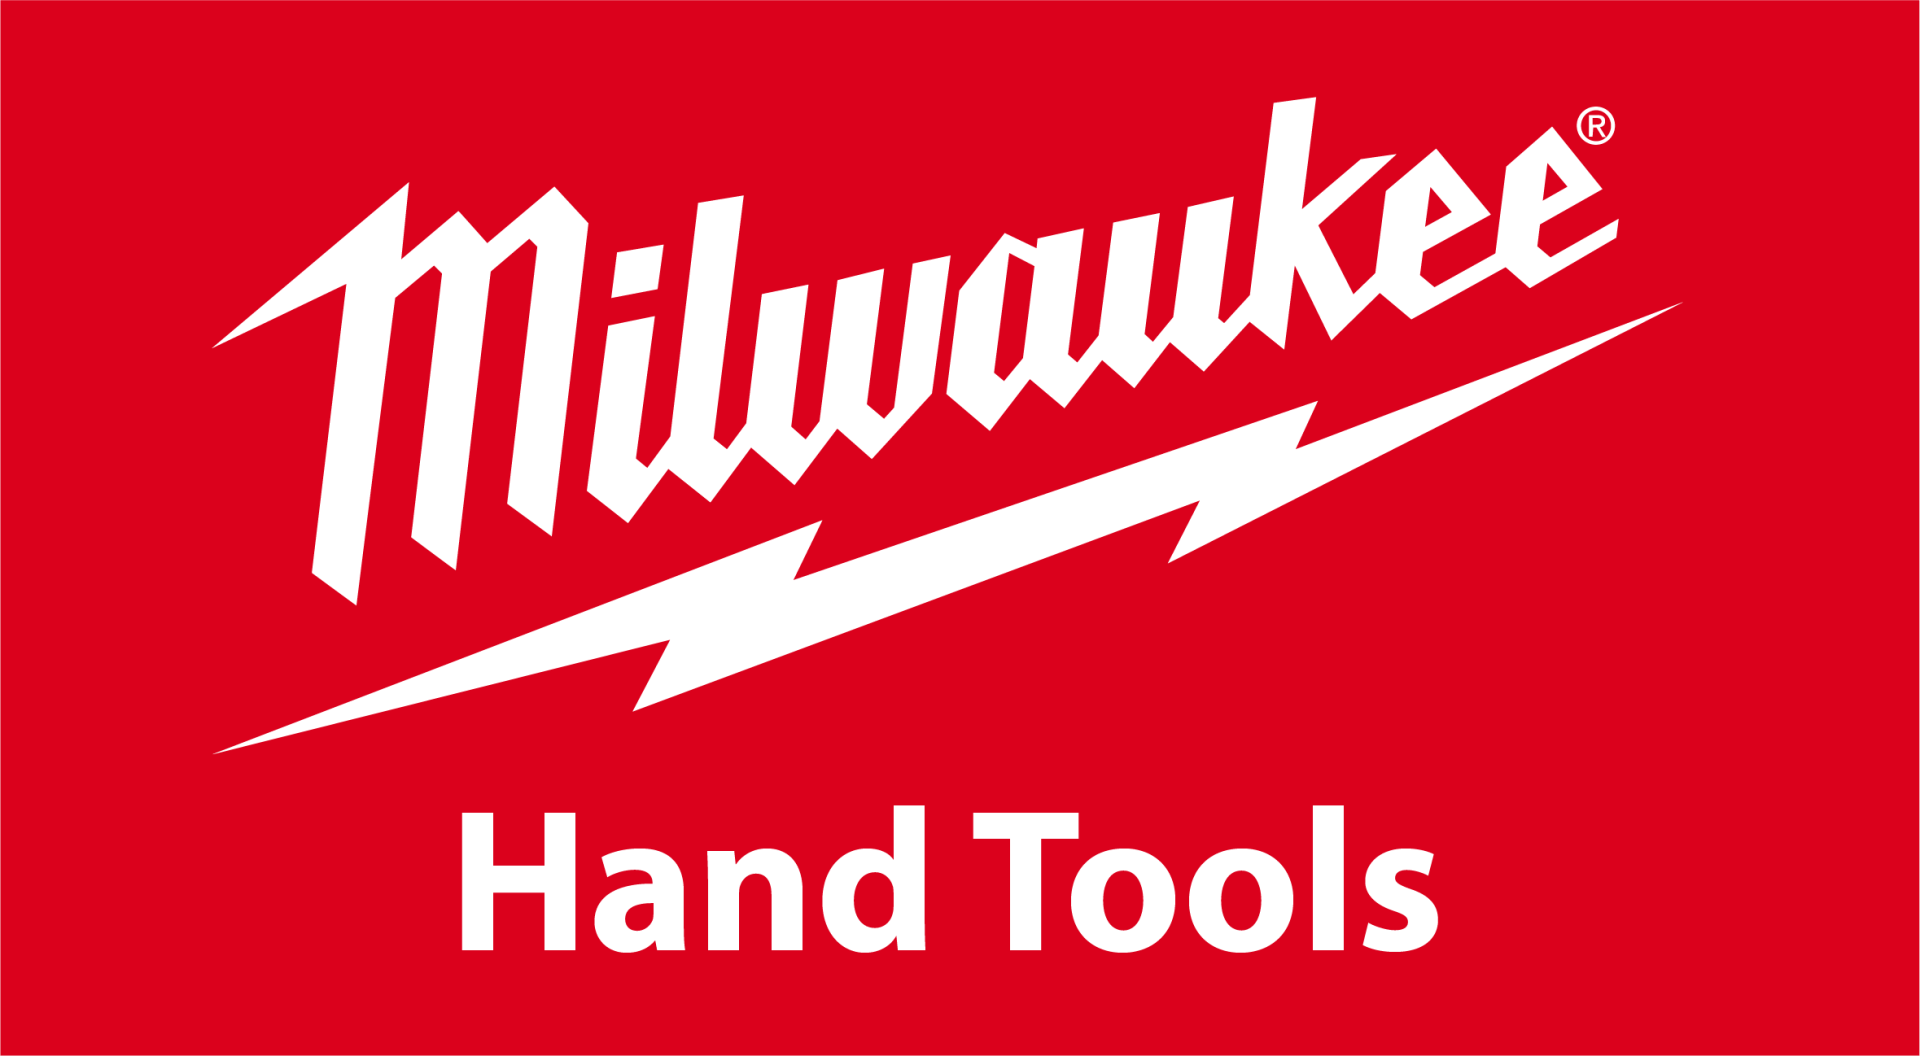 Milwaukee logo and link to website